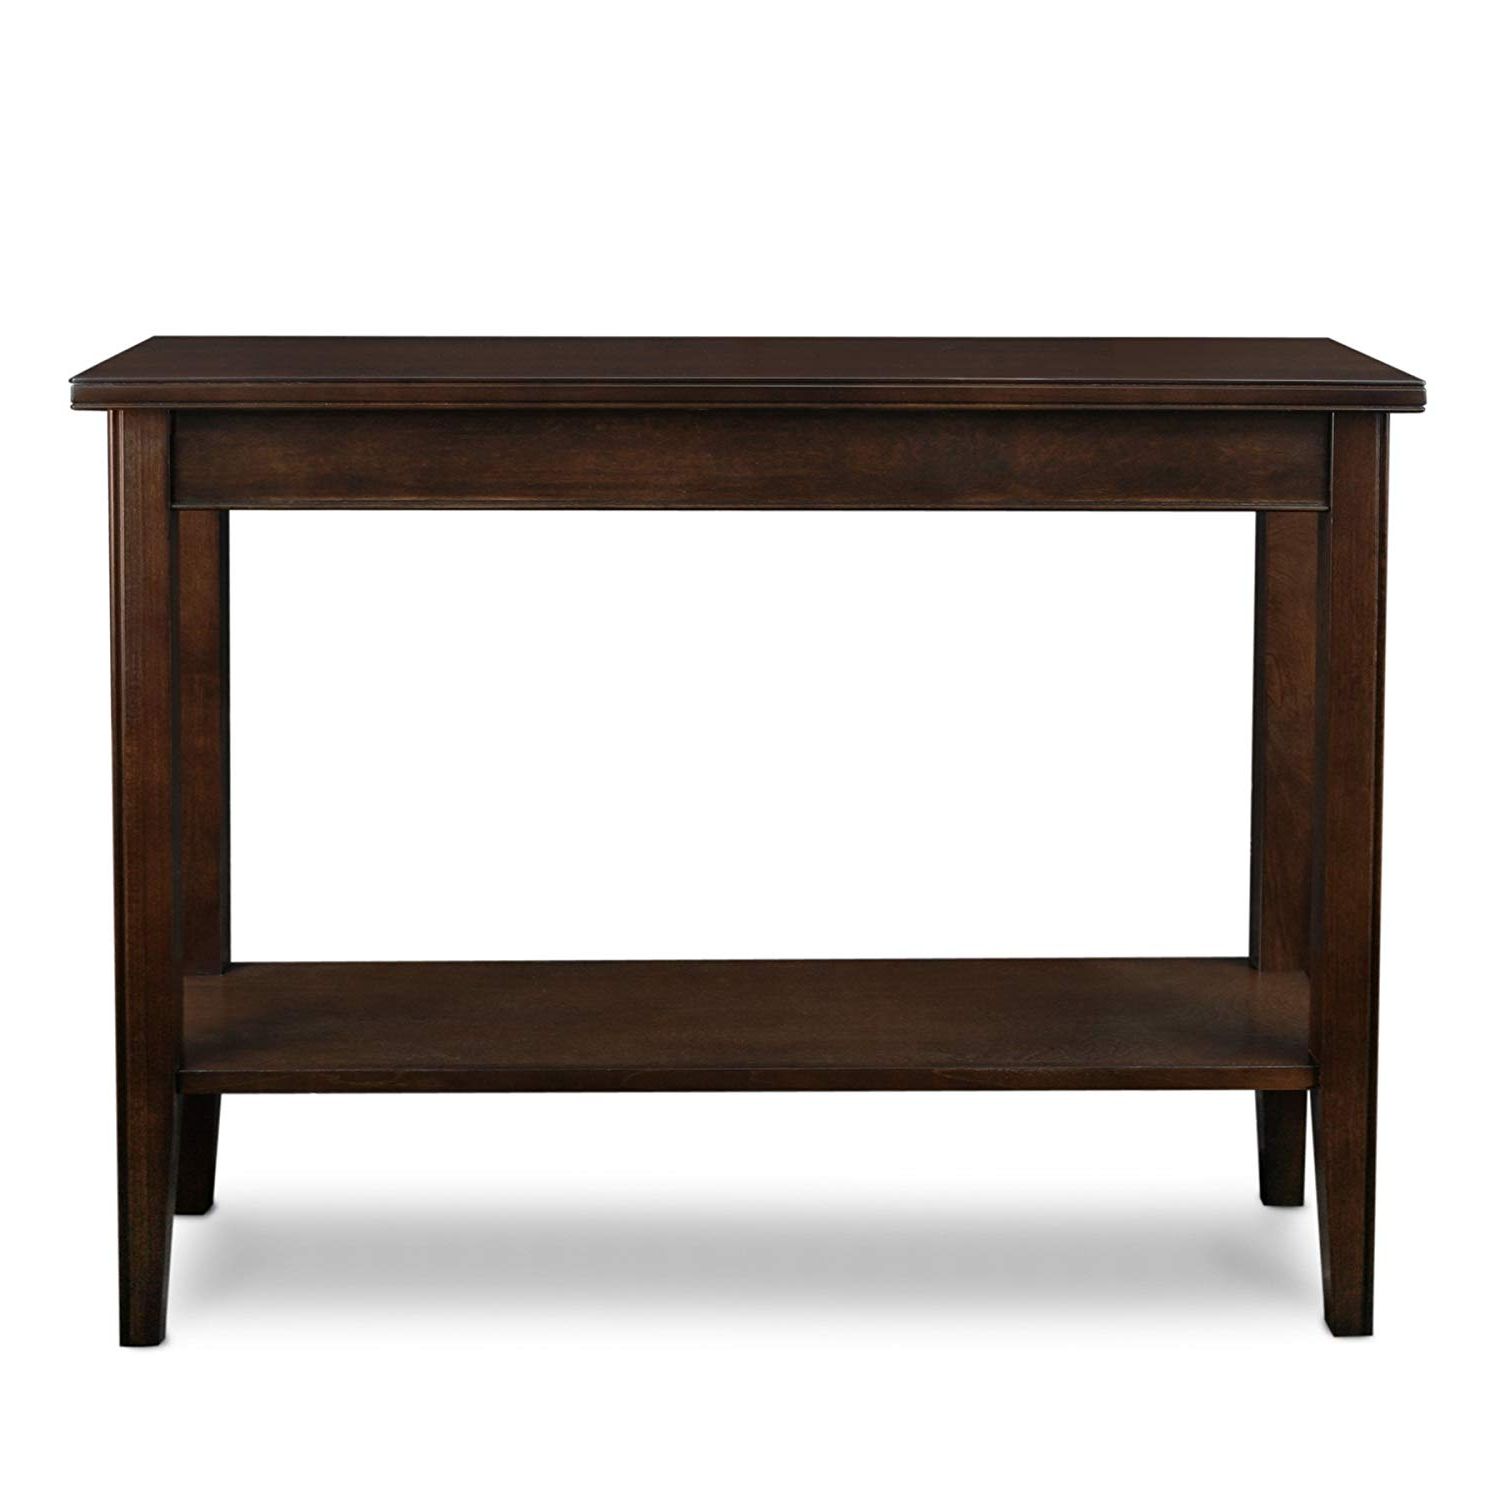 Favorite Amazon: Leick Laurent Hall Console Table: Kitchen & Dining Inside Layered Wood Small Square Console Tables (View 10 of 20)